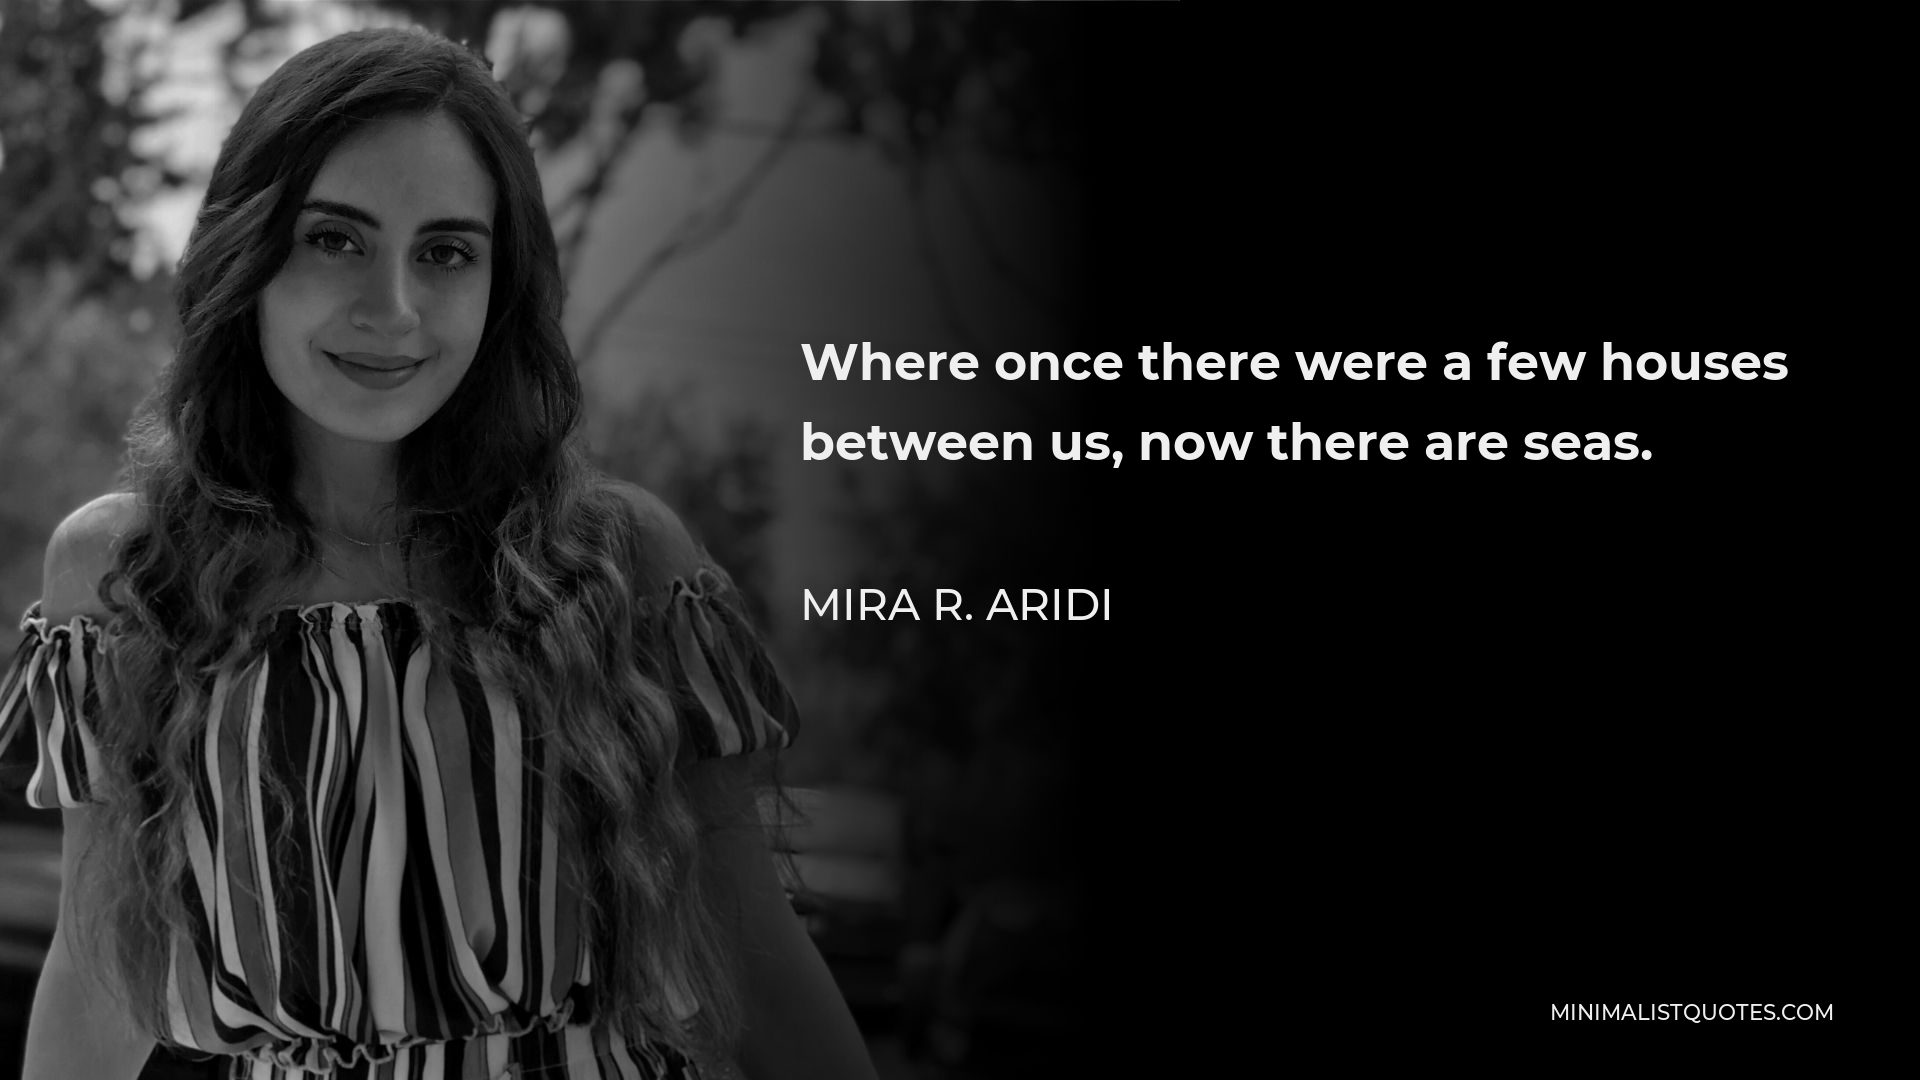 Mira R. Aridi Quote - Where once there were a few houses between us, now there are seas.